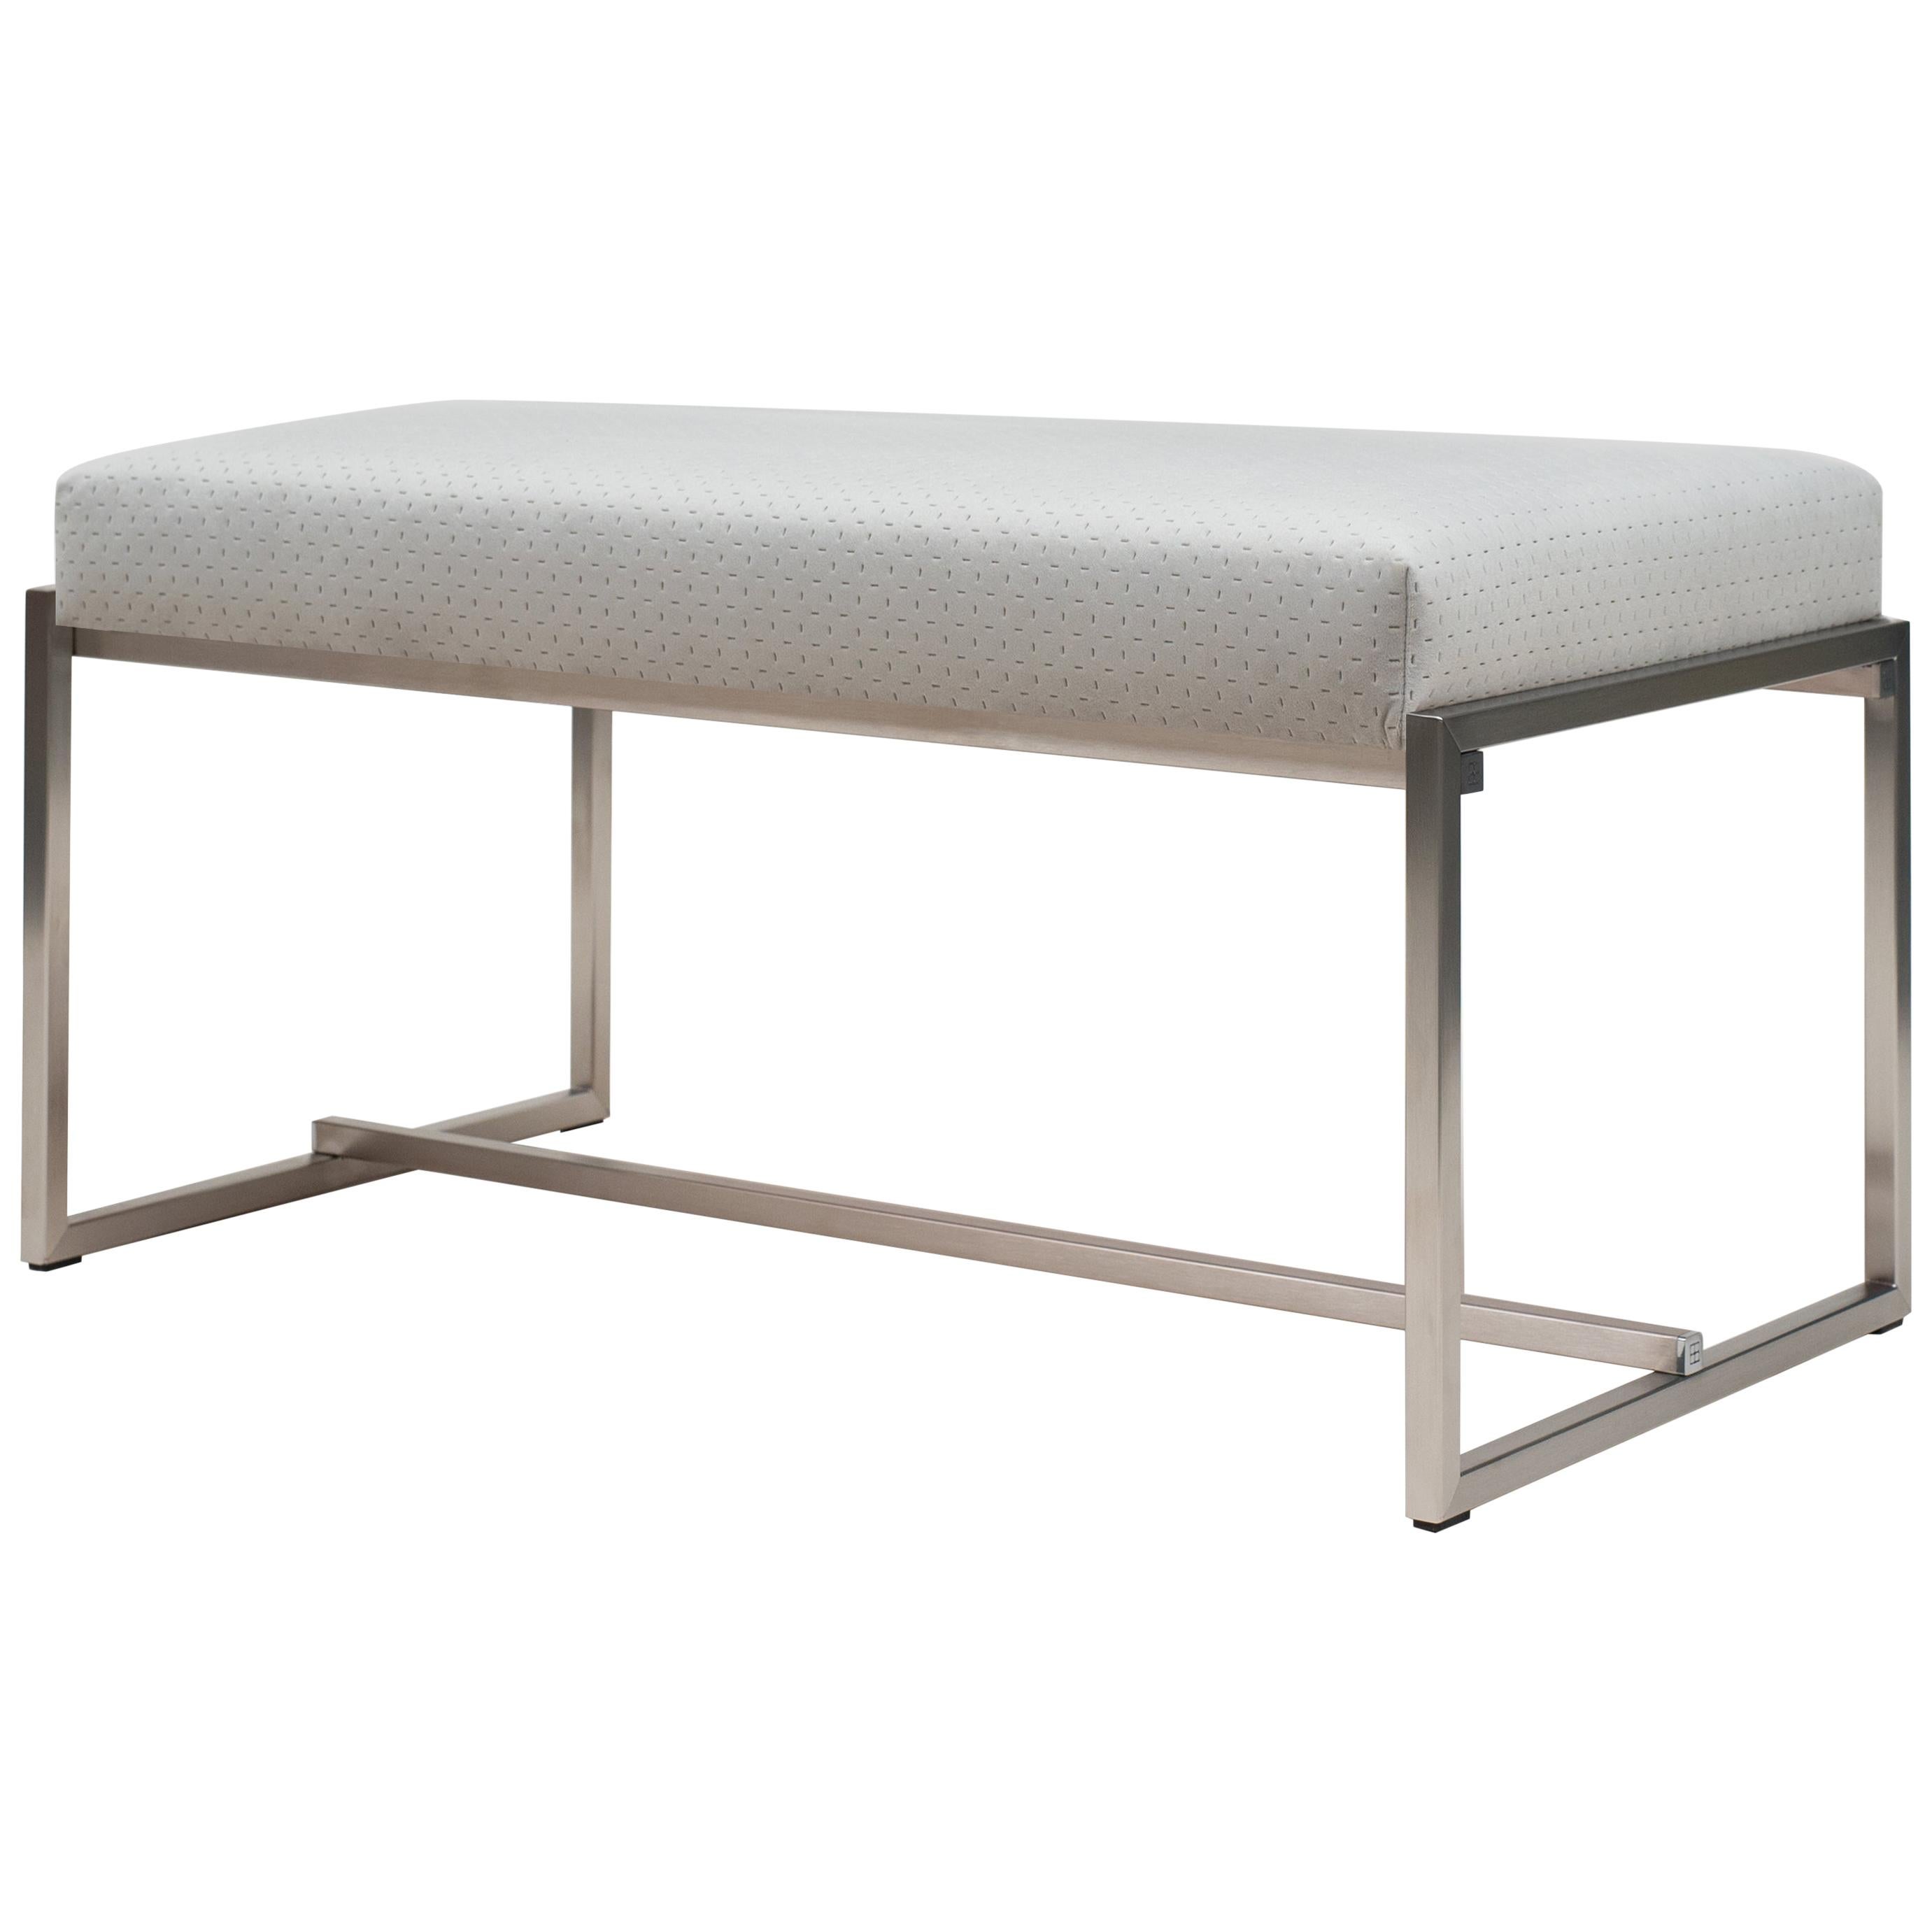 Peter Ghyczy Bench Urban Grace 'GB03' Stainless Steel Matt  / Pale Grey Fabric